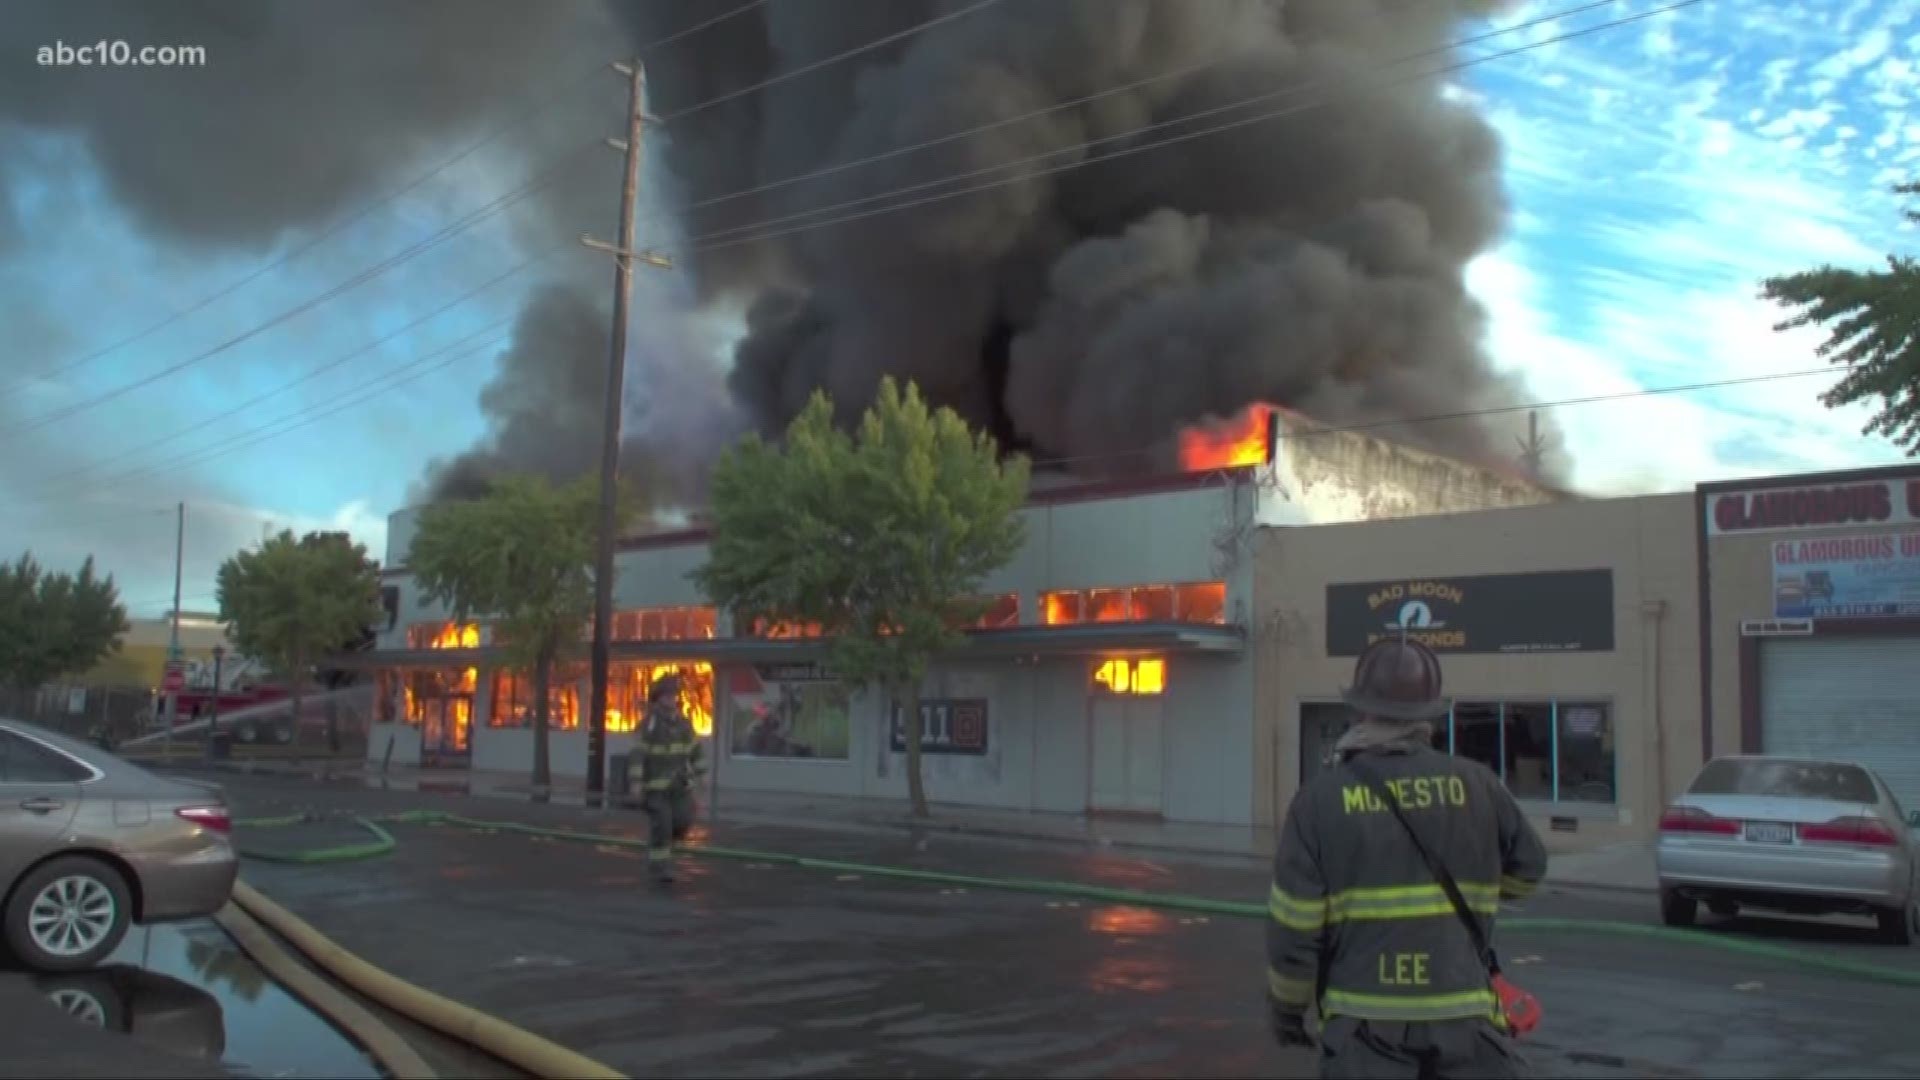 A long-time Modesto business reopened this week only one month after losing everything in a devastating fire.